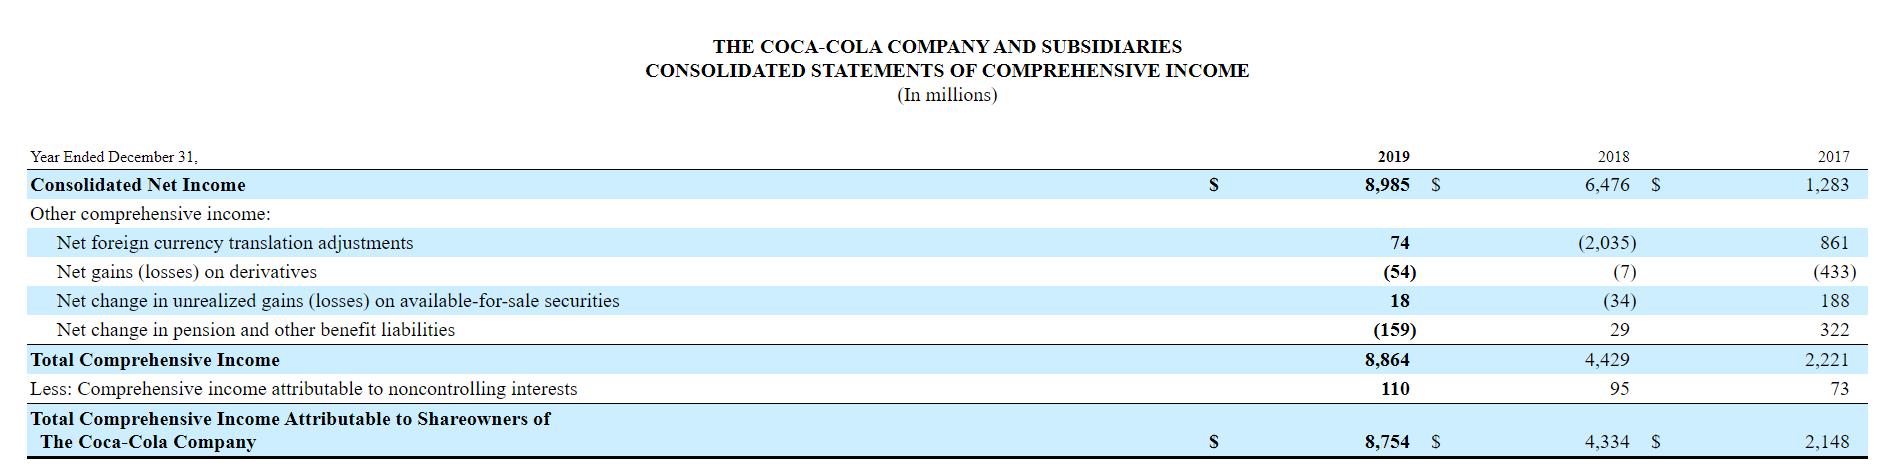 THE COCA-COLA COMPANY AND SUBSIDIARIES CONSOLIDATED STATEMENTS OF COMPREHENSIVE INCOME (In millions) 2019 2018 2017 S8,985 S